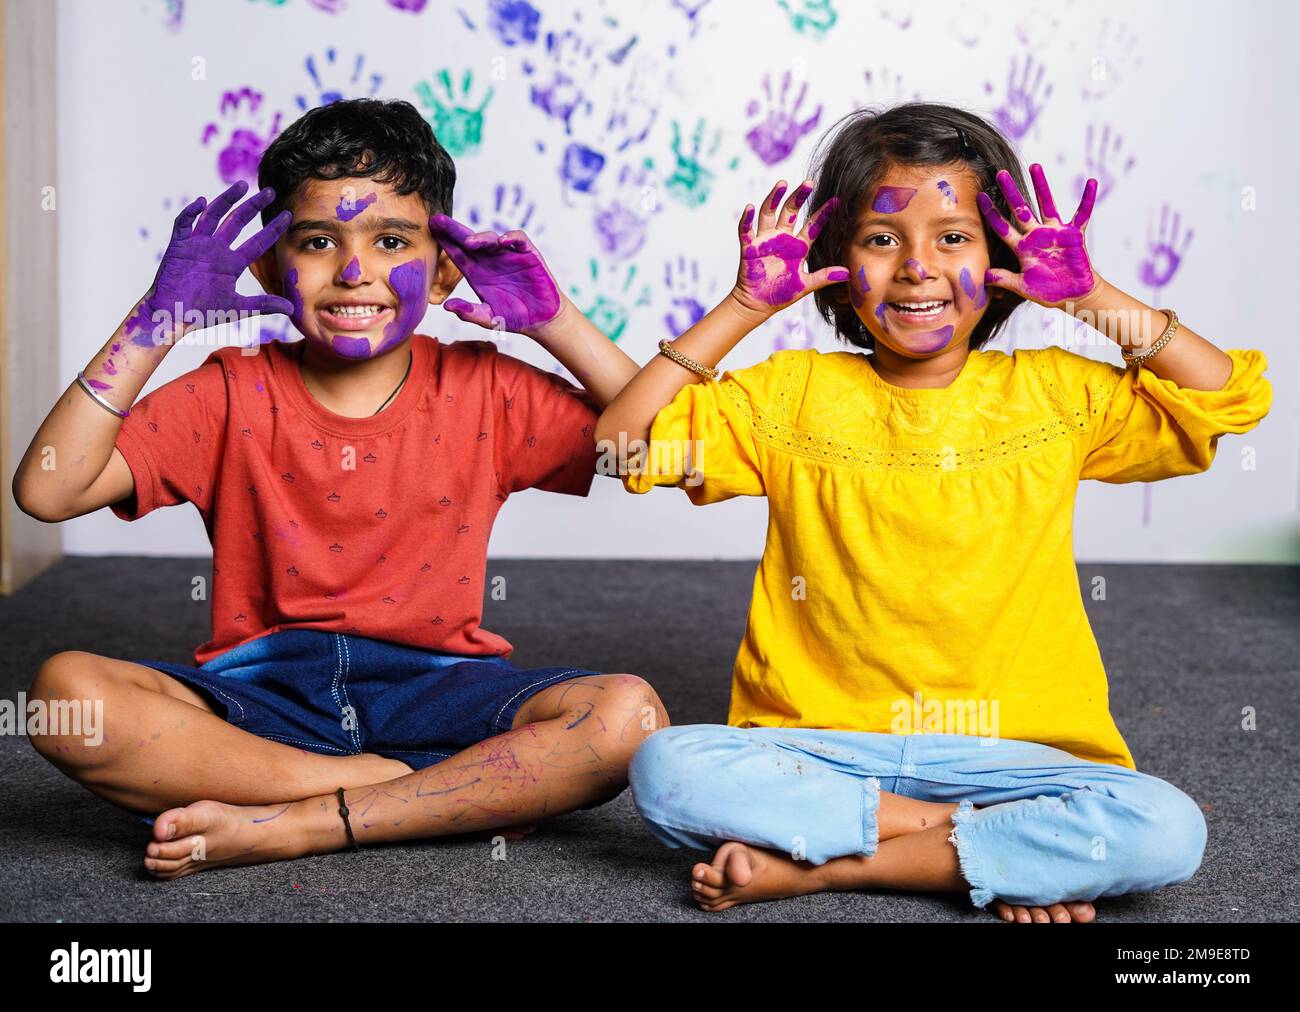 Cheerful kids with messy colorful hands grimacing to camera at home - concept of mischievous, innocent and humor. Stock Photo